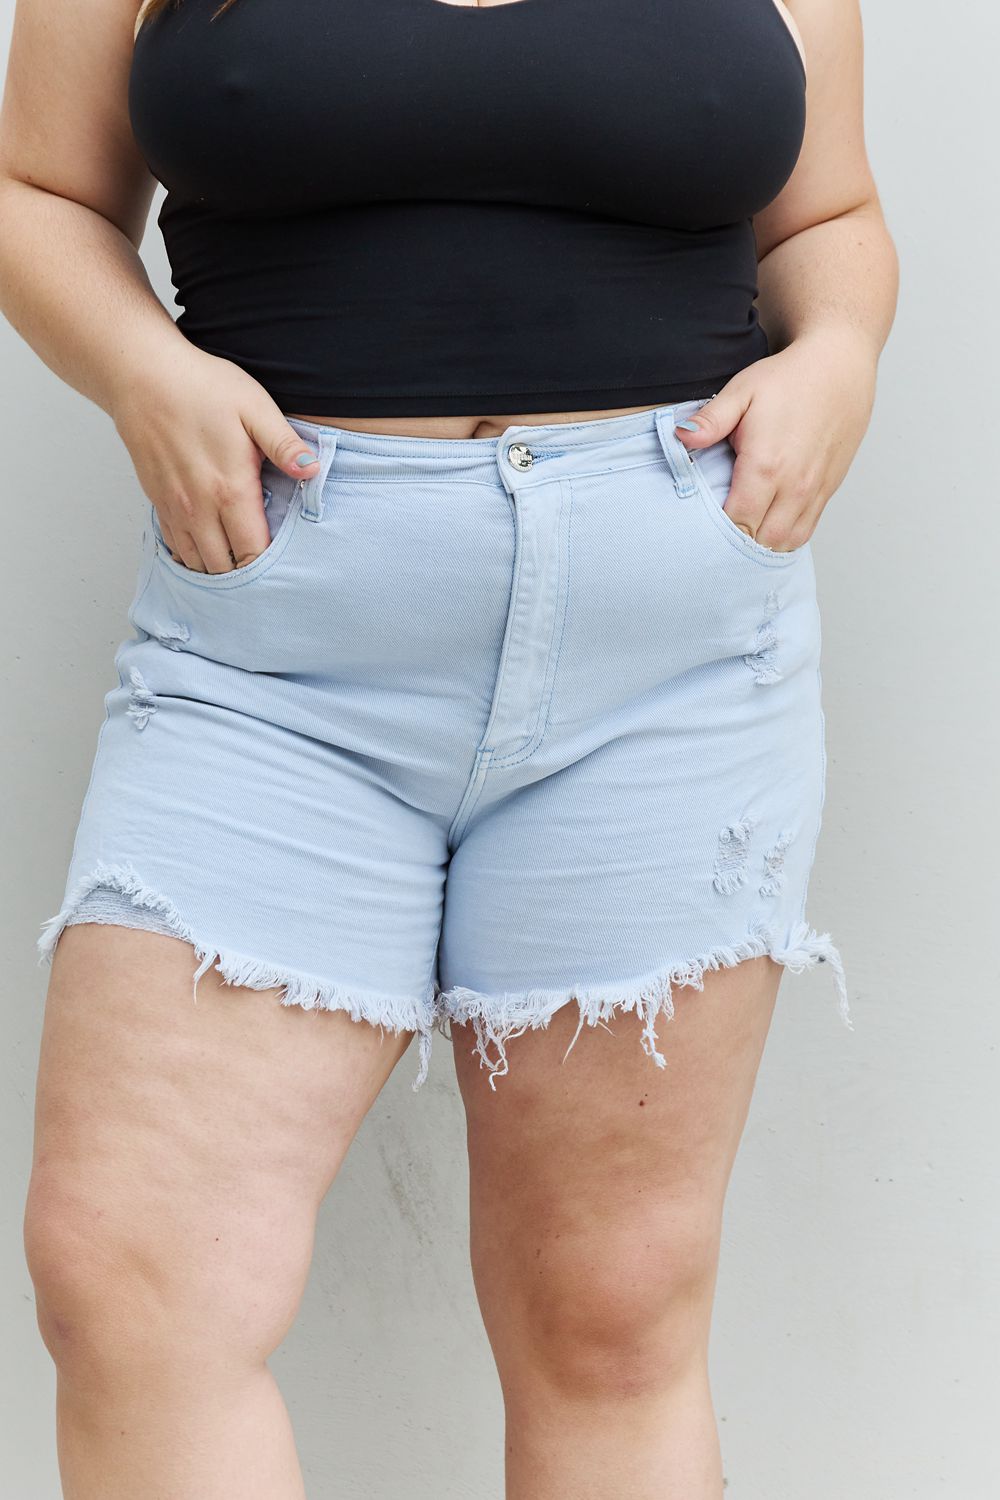 Kalie Shorts-SHIPS DIRECTLY TO YOU!